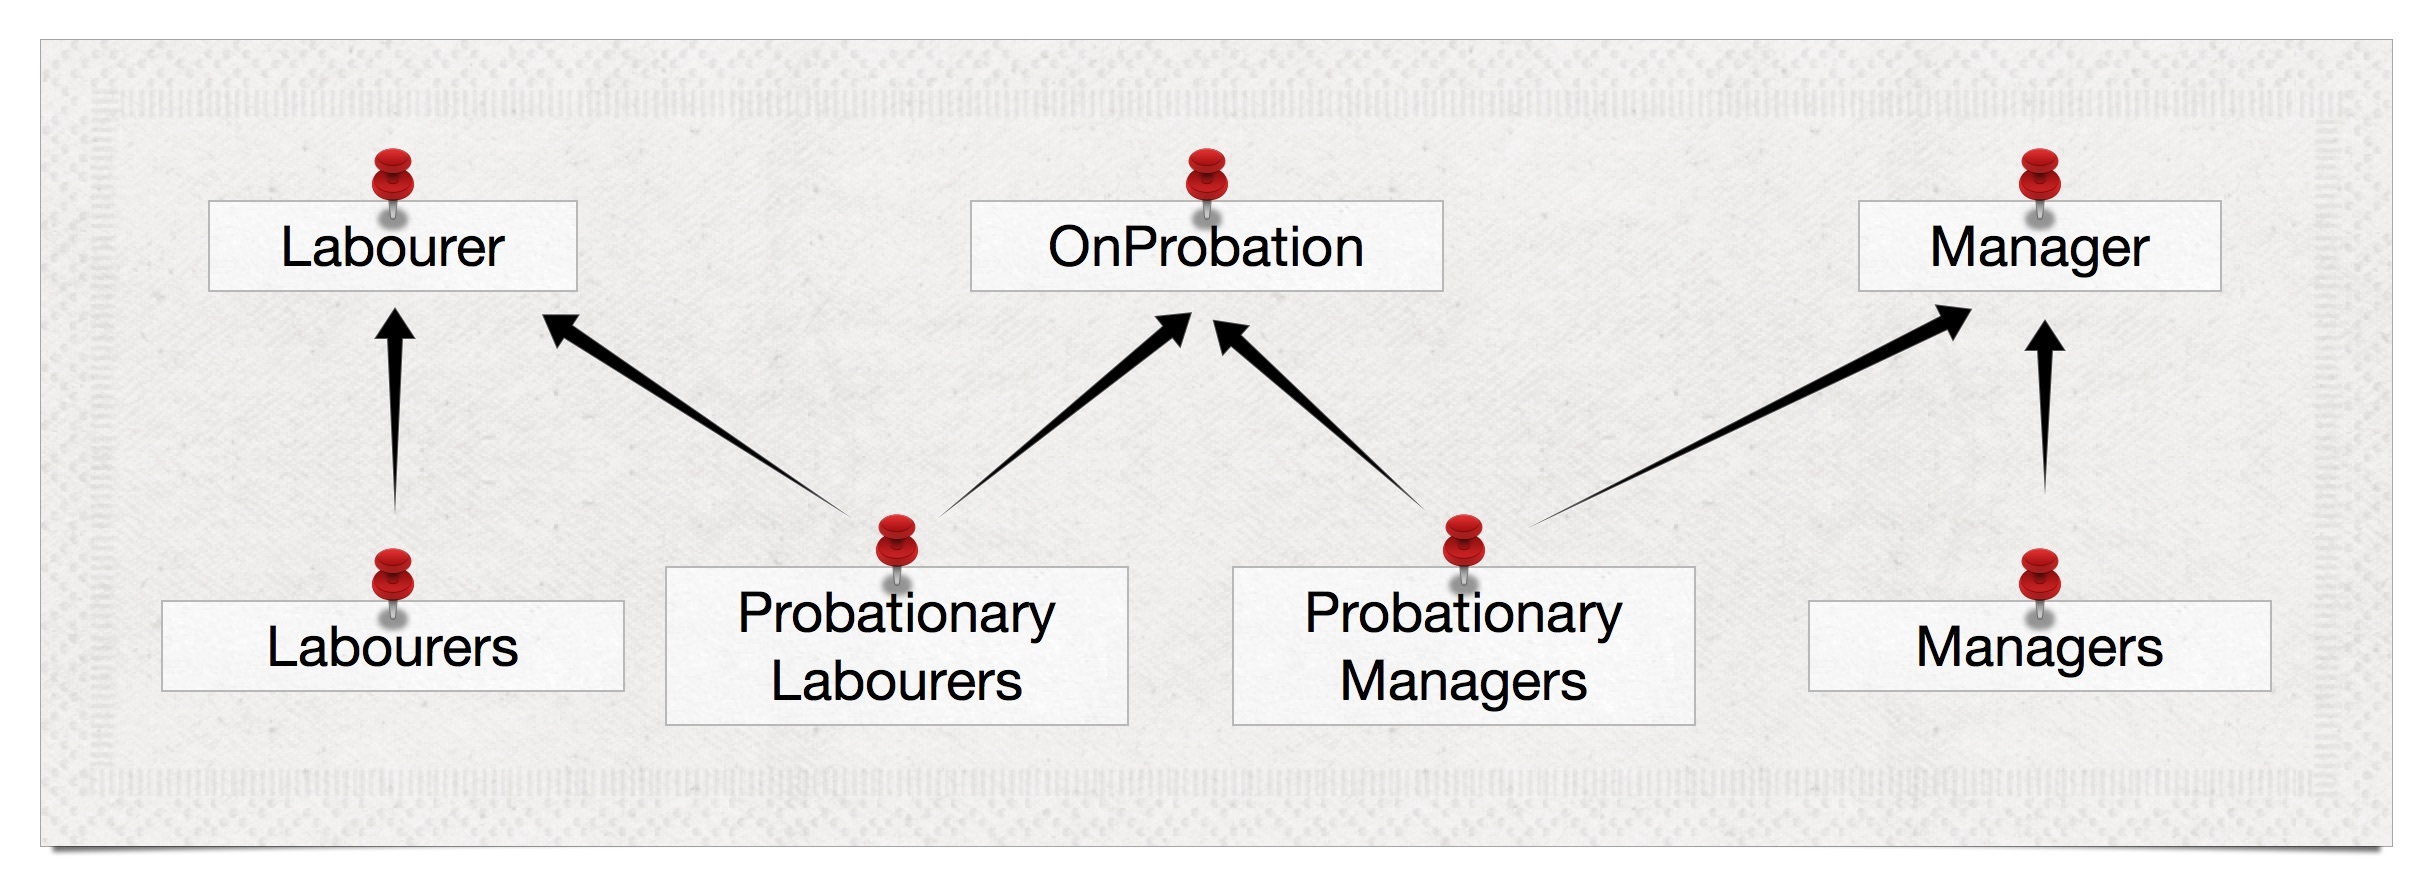 Labourers, Managers, and OnProbation